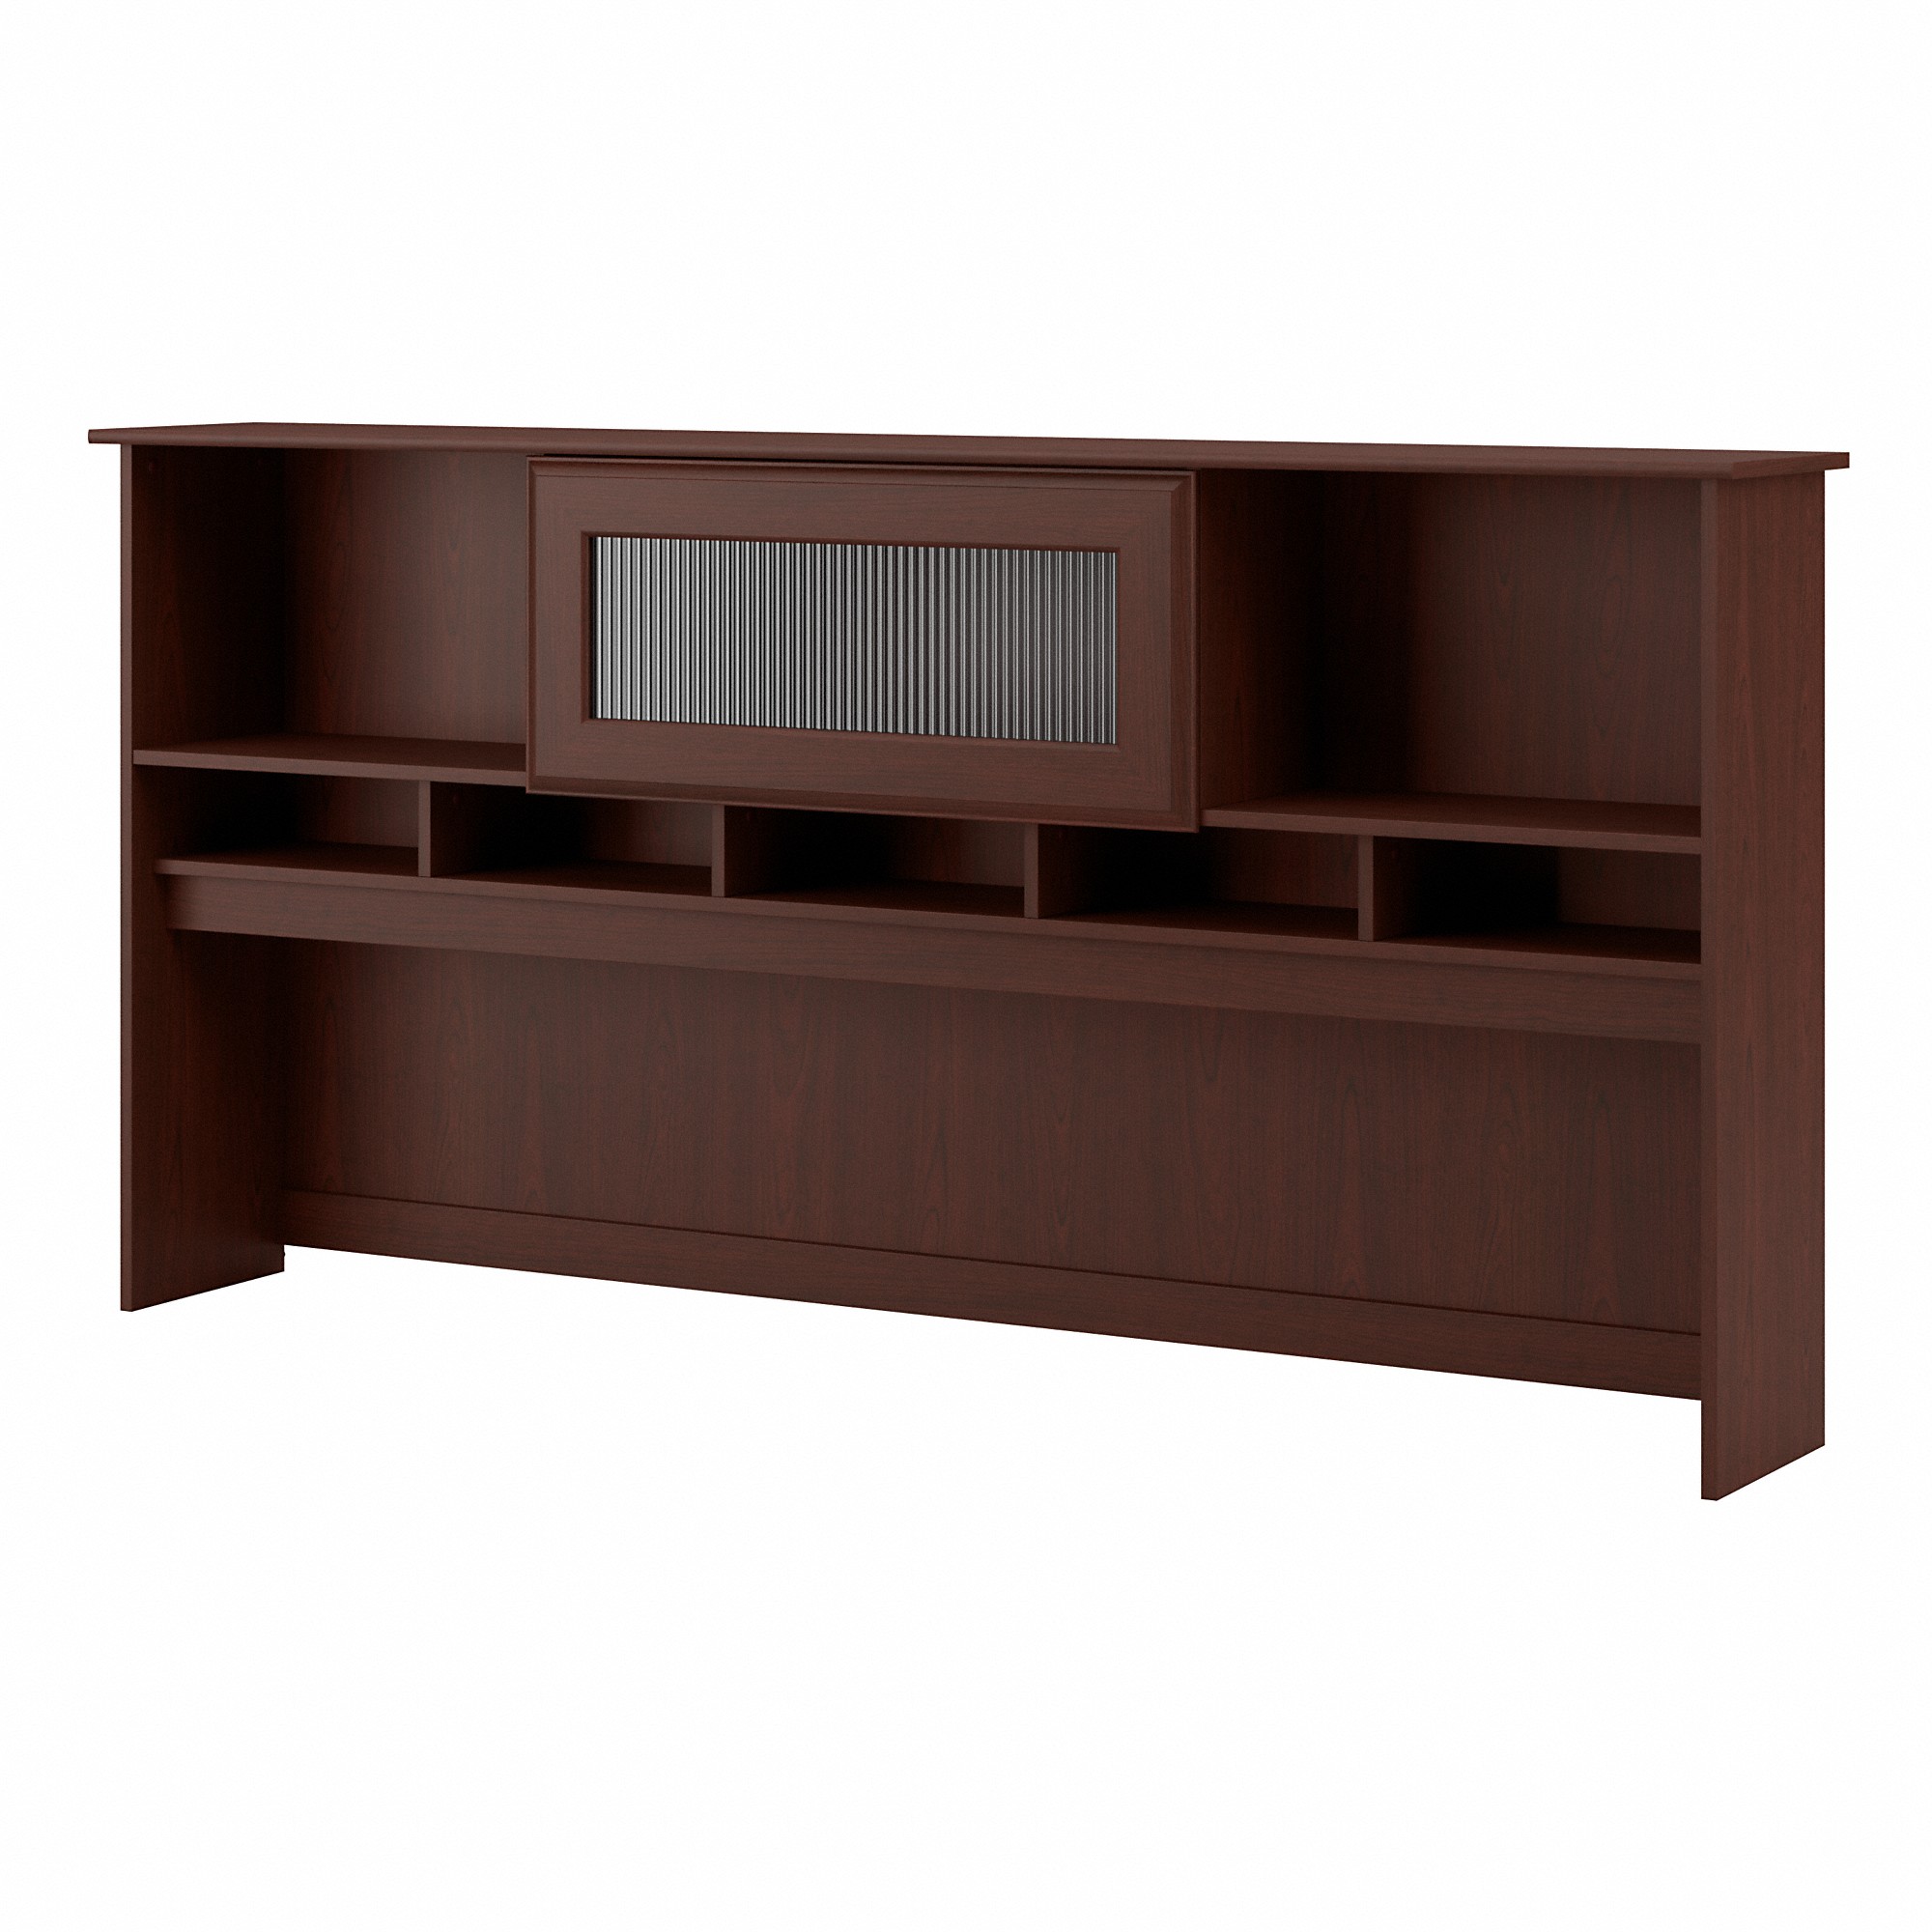 Cabot Modern 72W Hutch with Storage, Fits 72 W Desk (sold separately) in Harvest Cherry - image 2 of 8